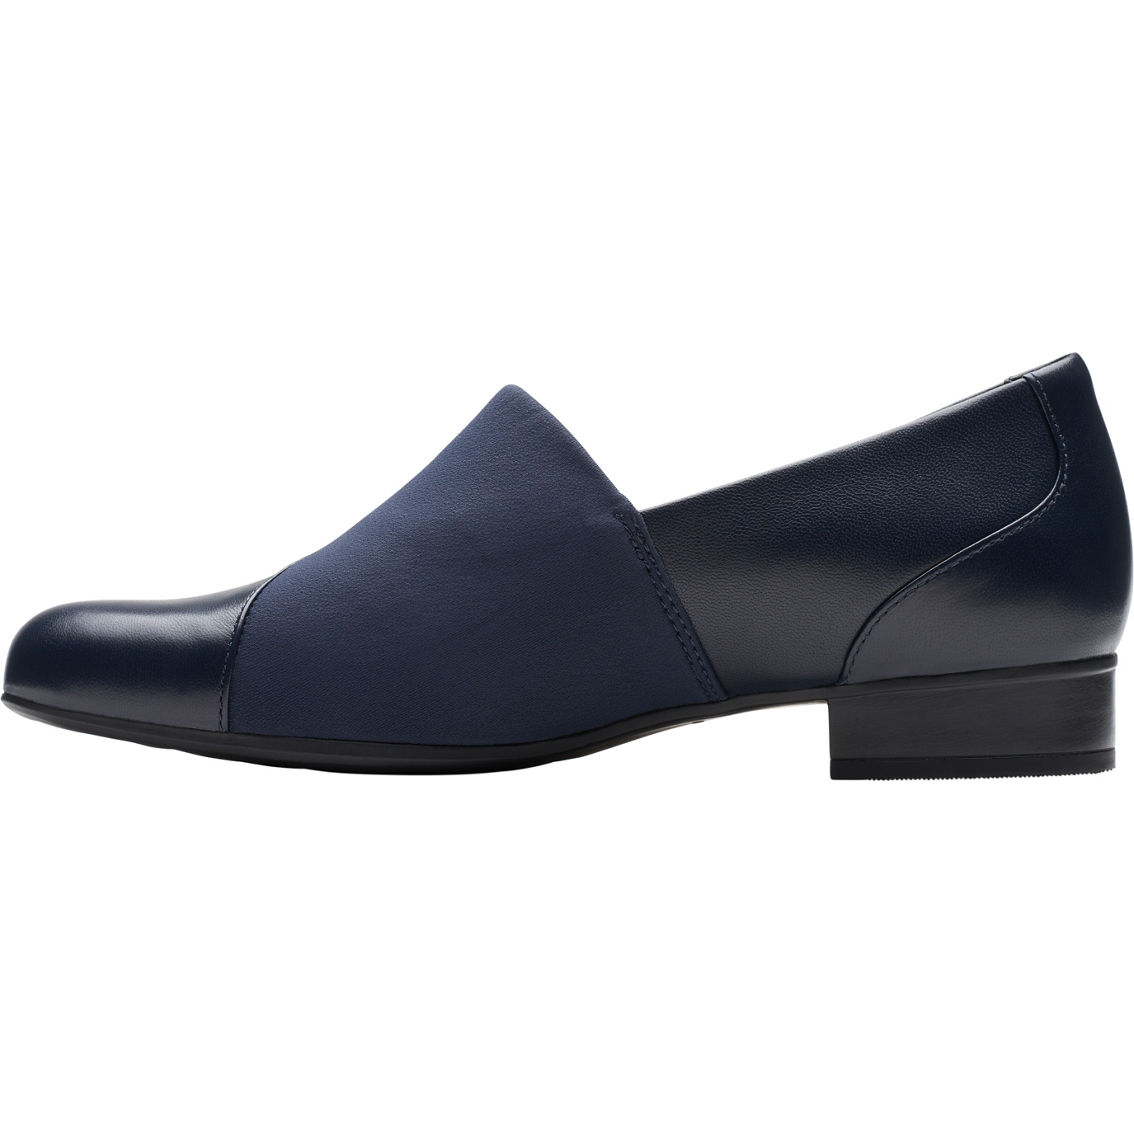 Clarks Women's Juliet Gem Leather Slip-On Casual Shoes - Image 3 of 7